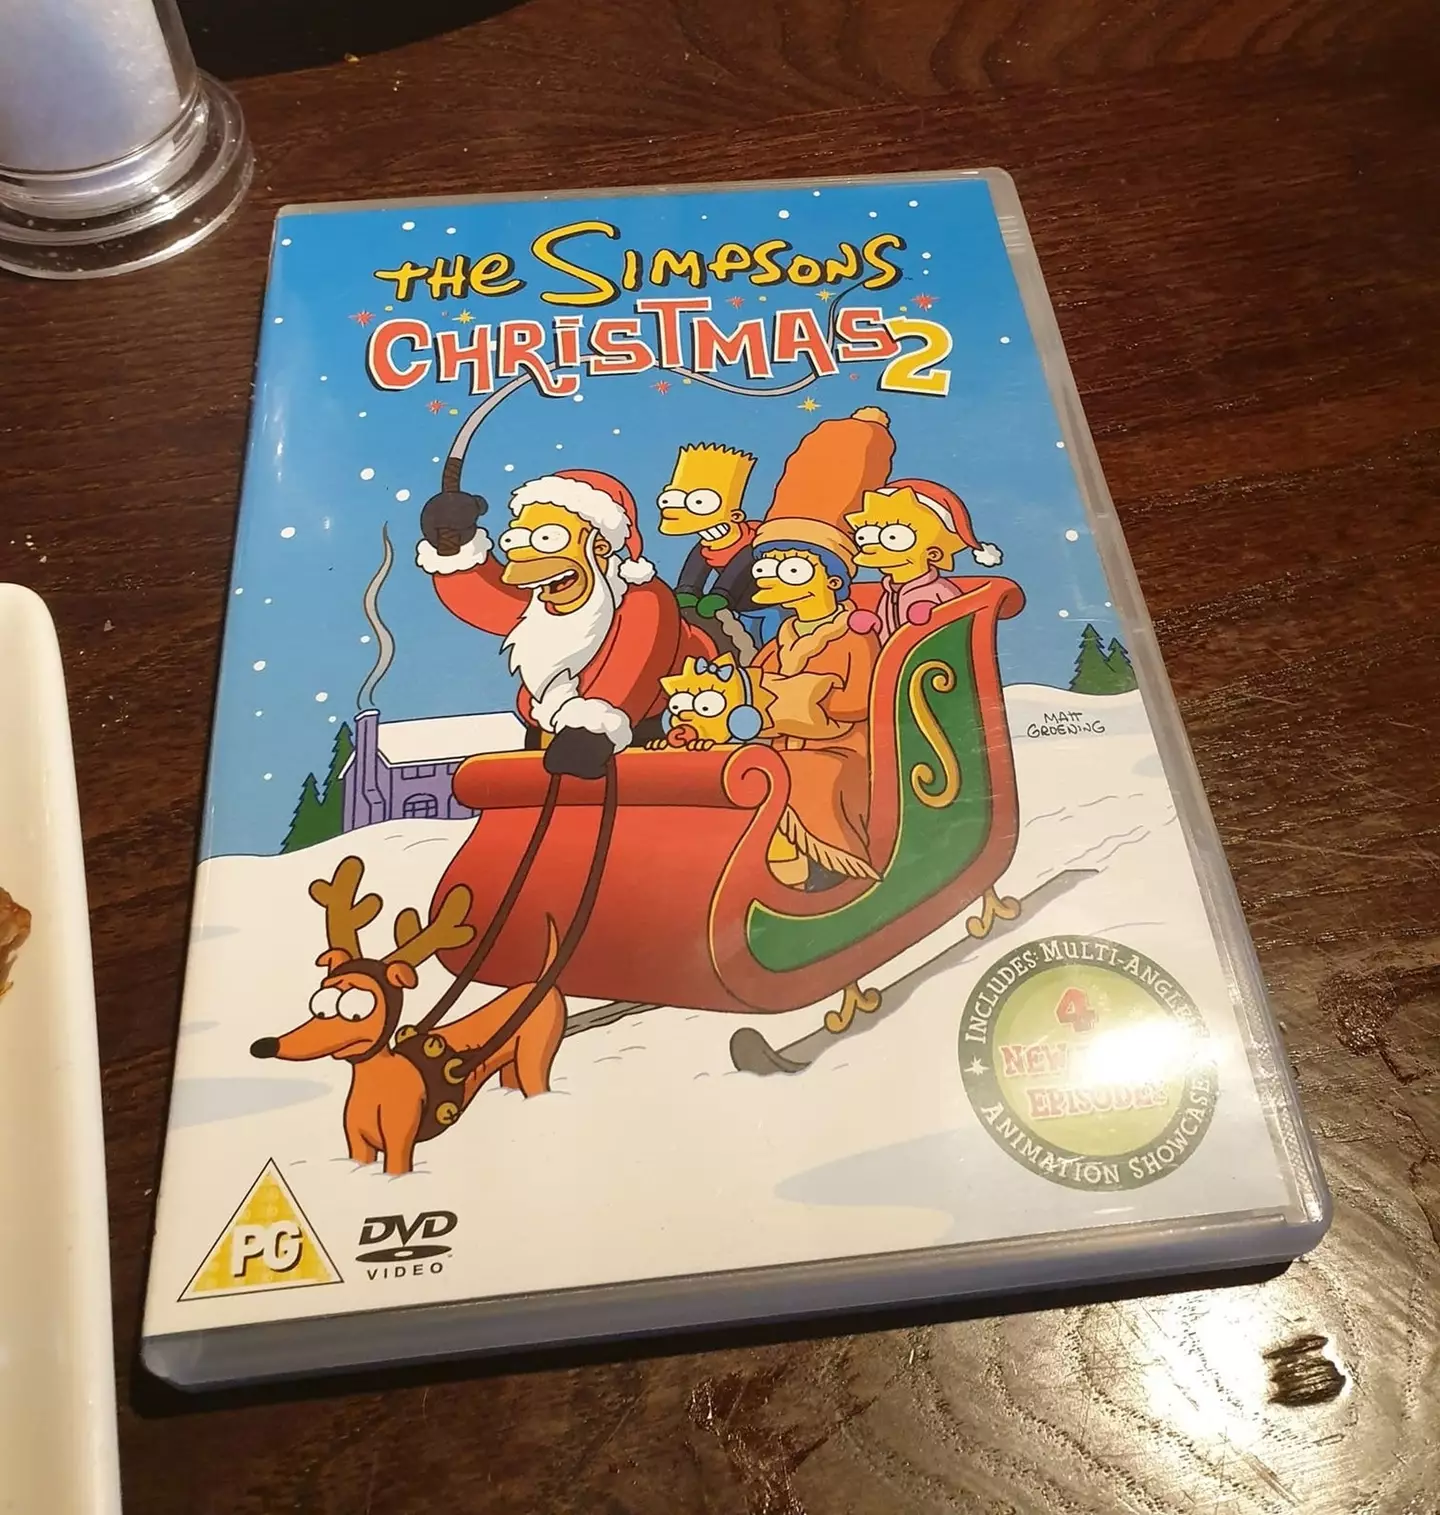 The unsuspecting parents purchased a Simpsons DVD.